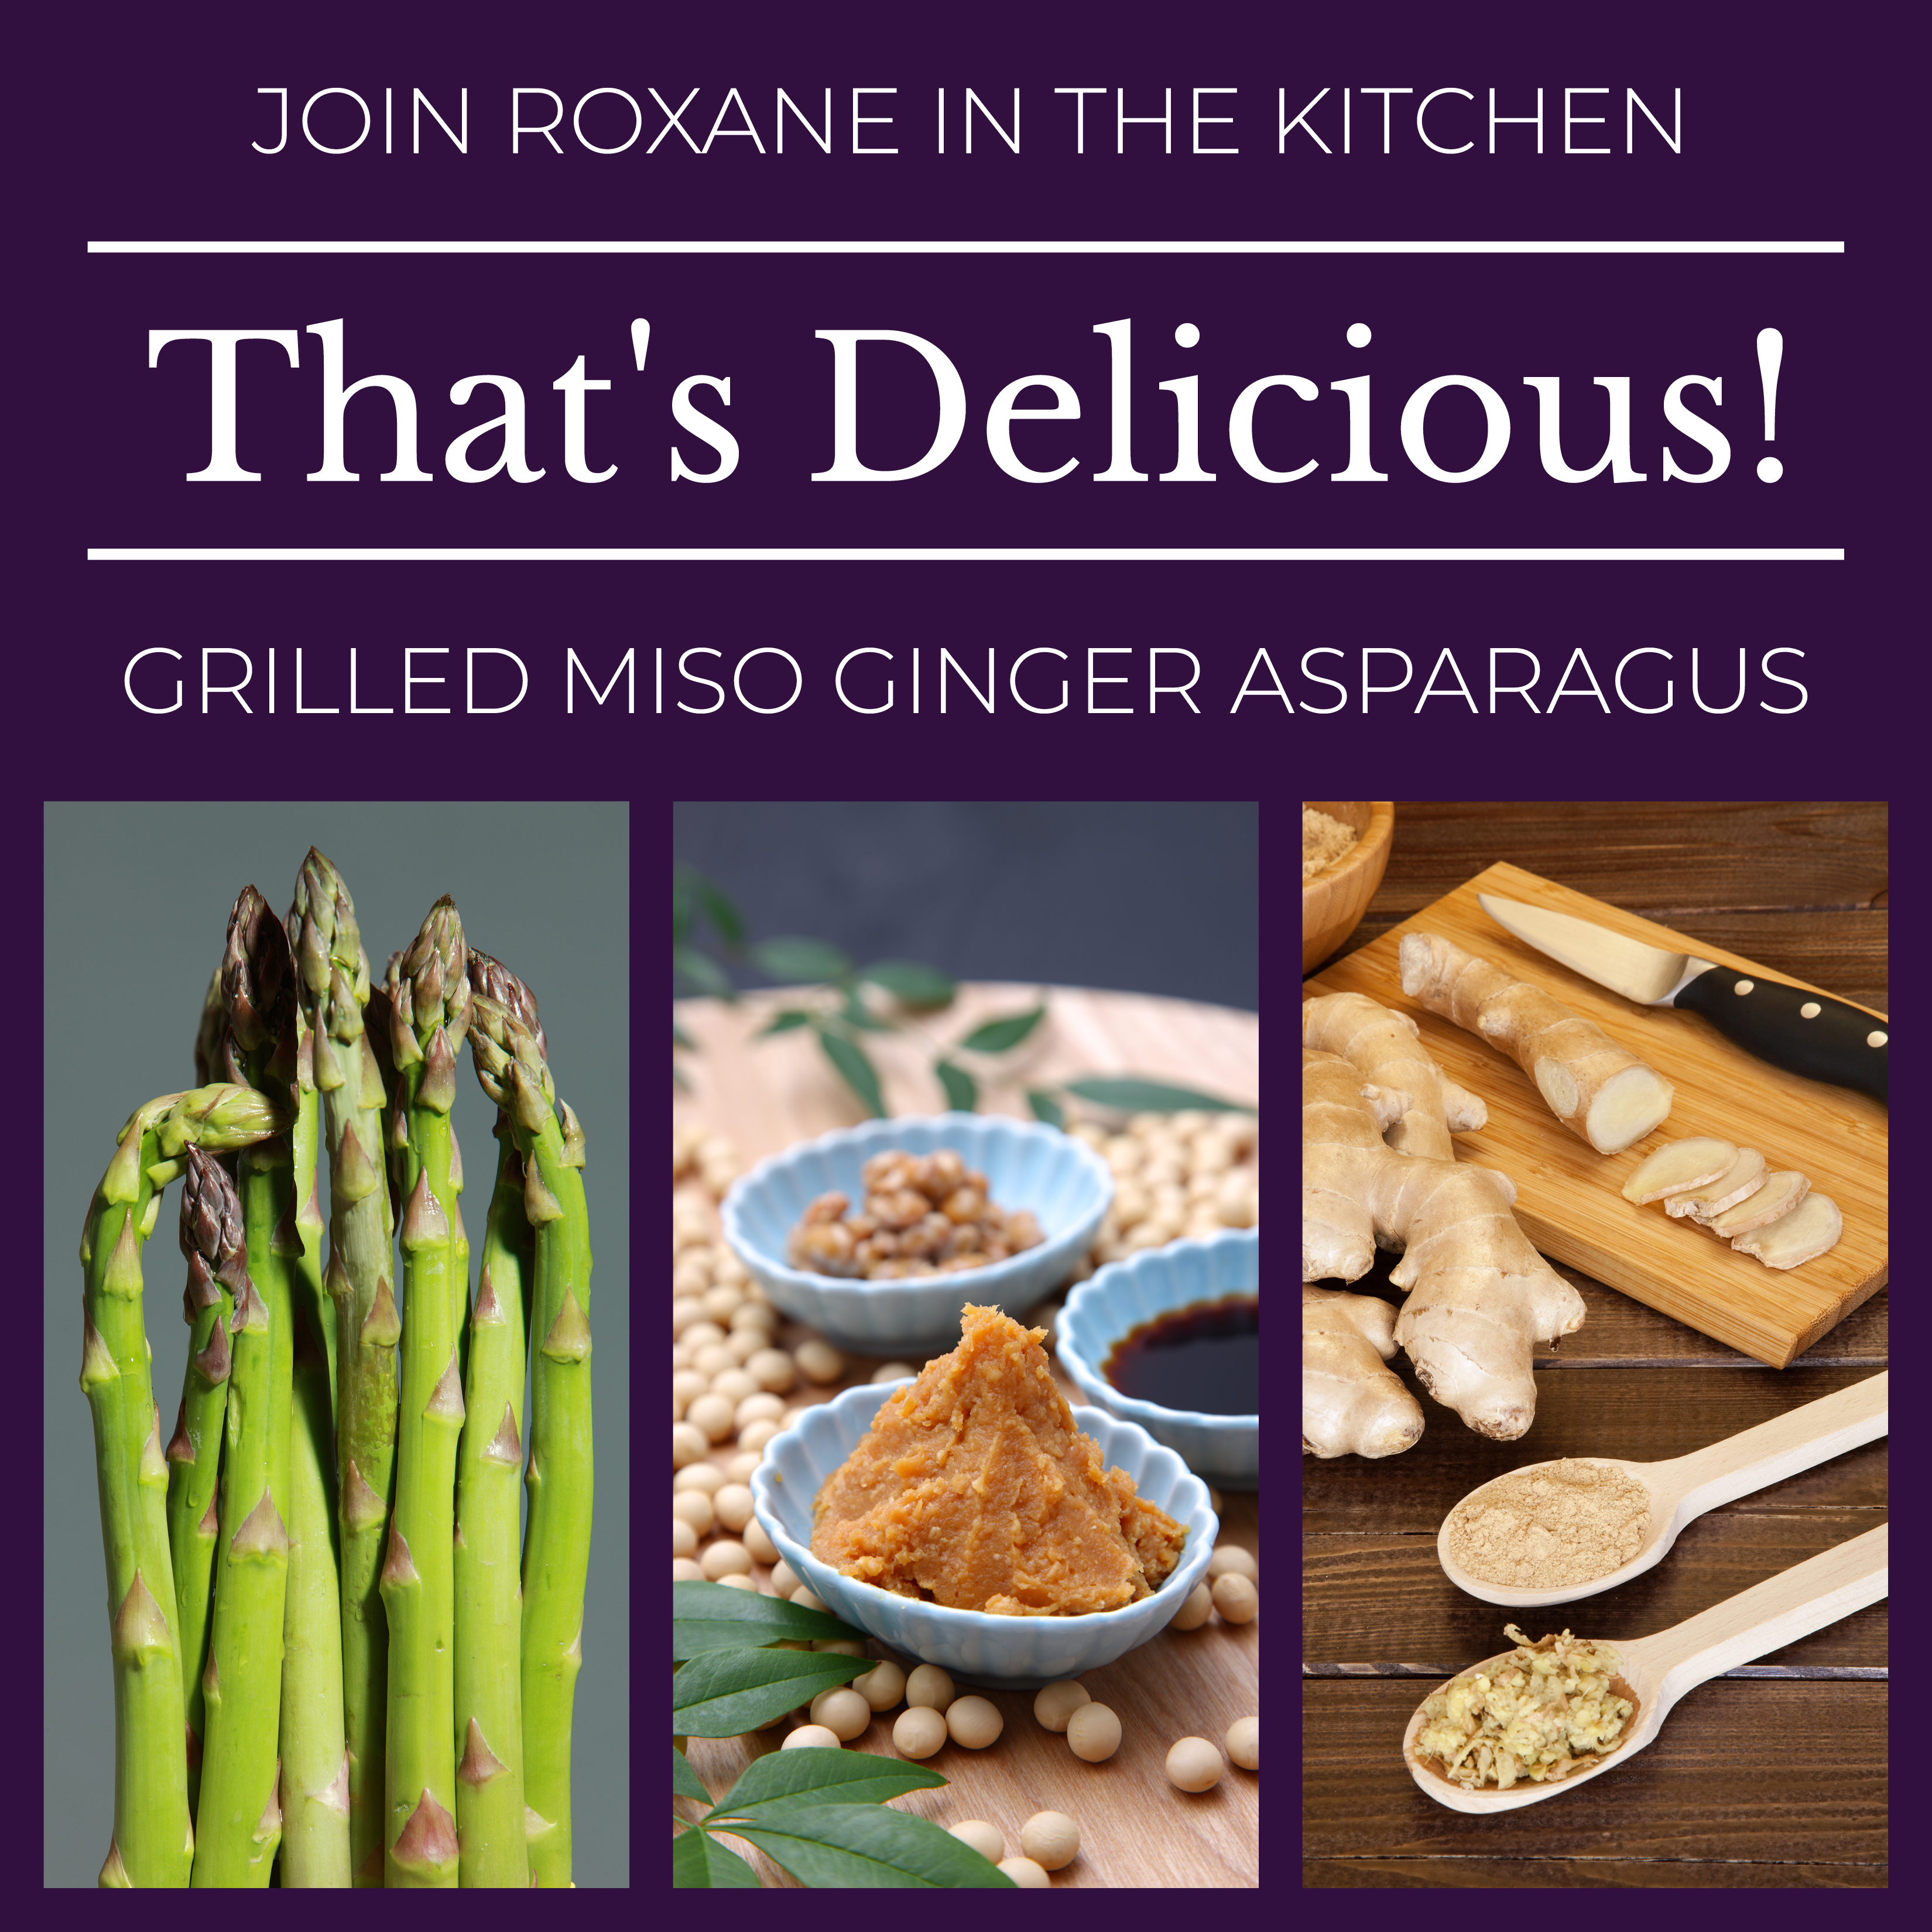 That's Delicious! Grilled Miso Ginger Asparagus